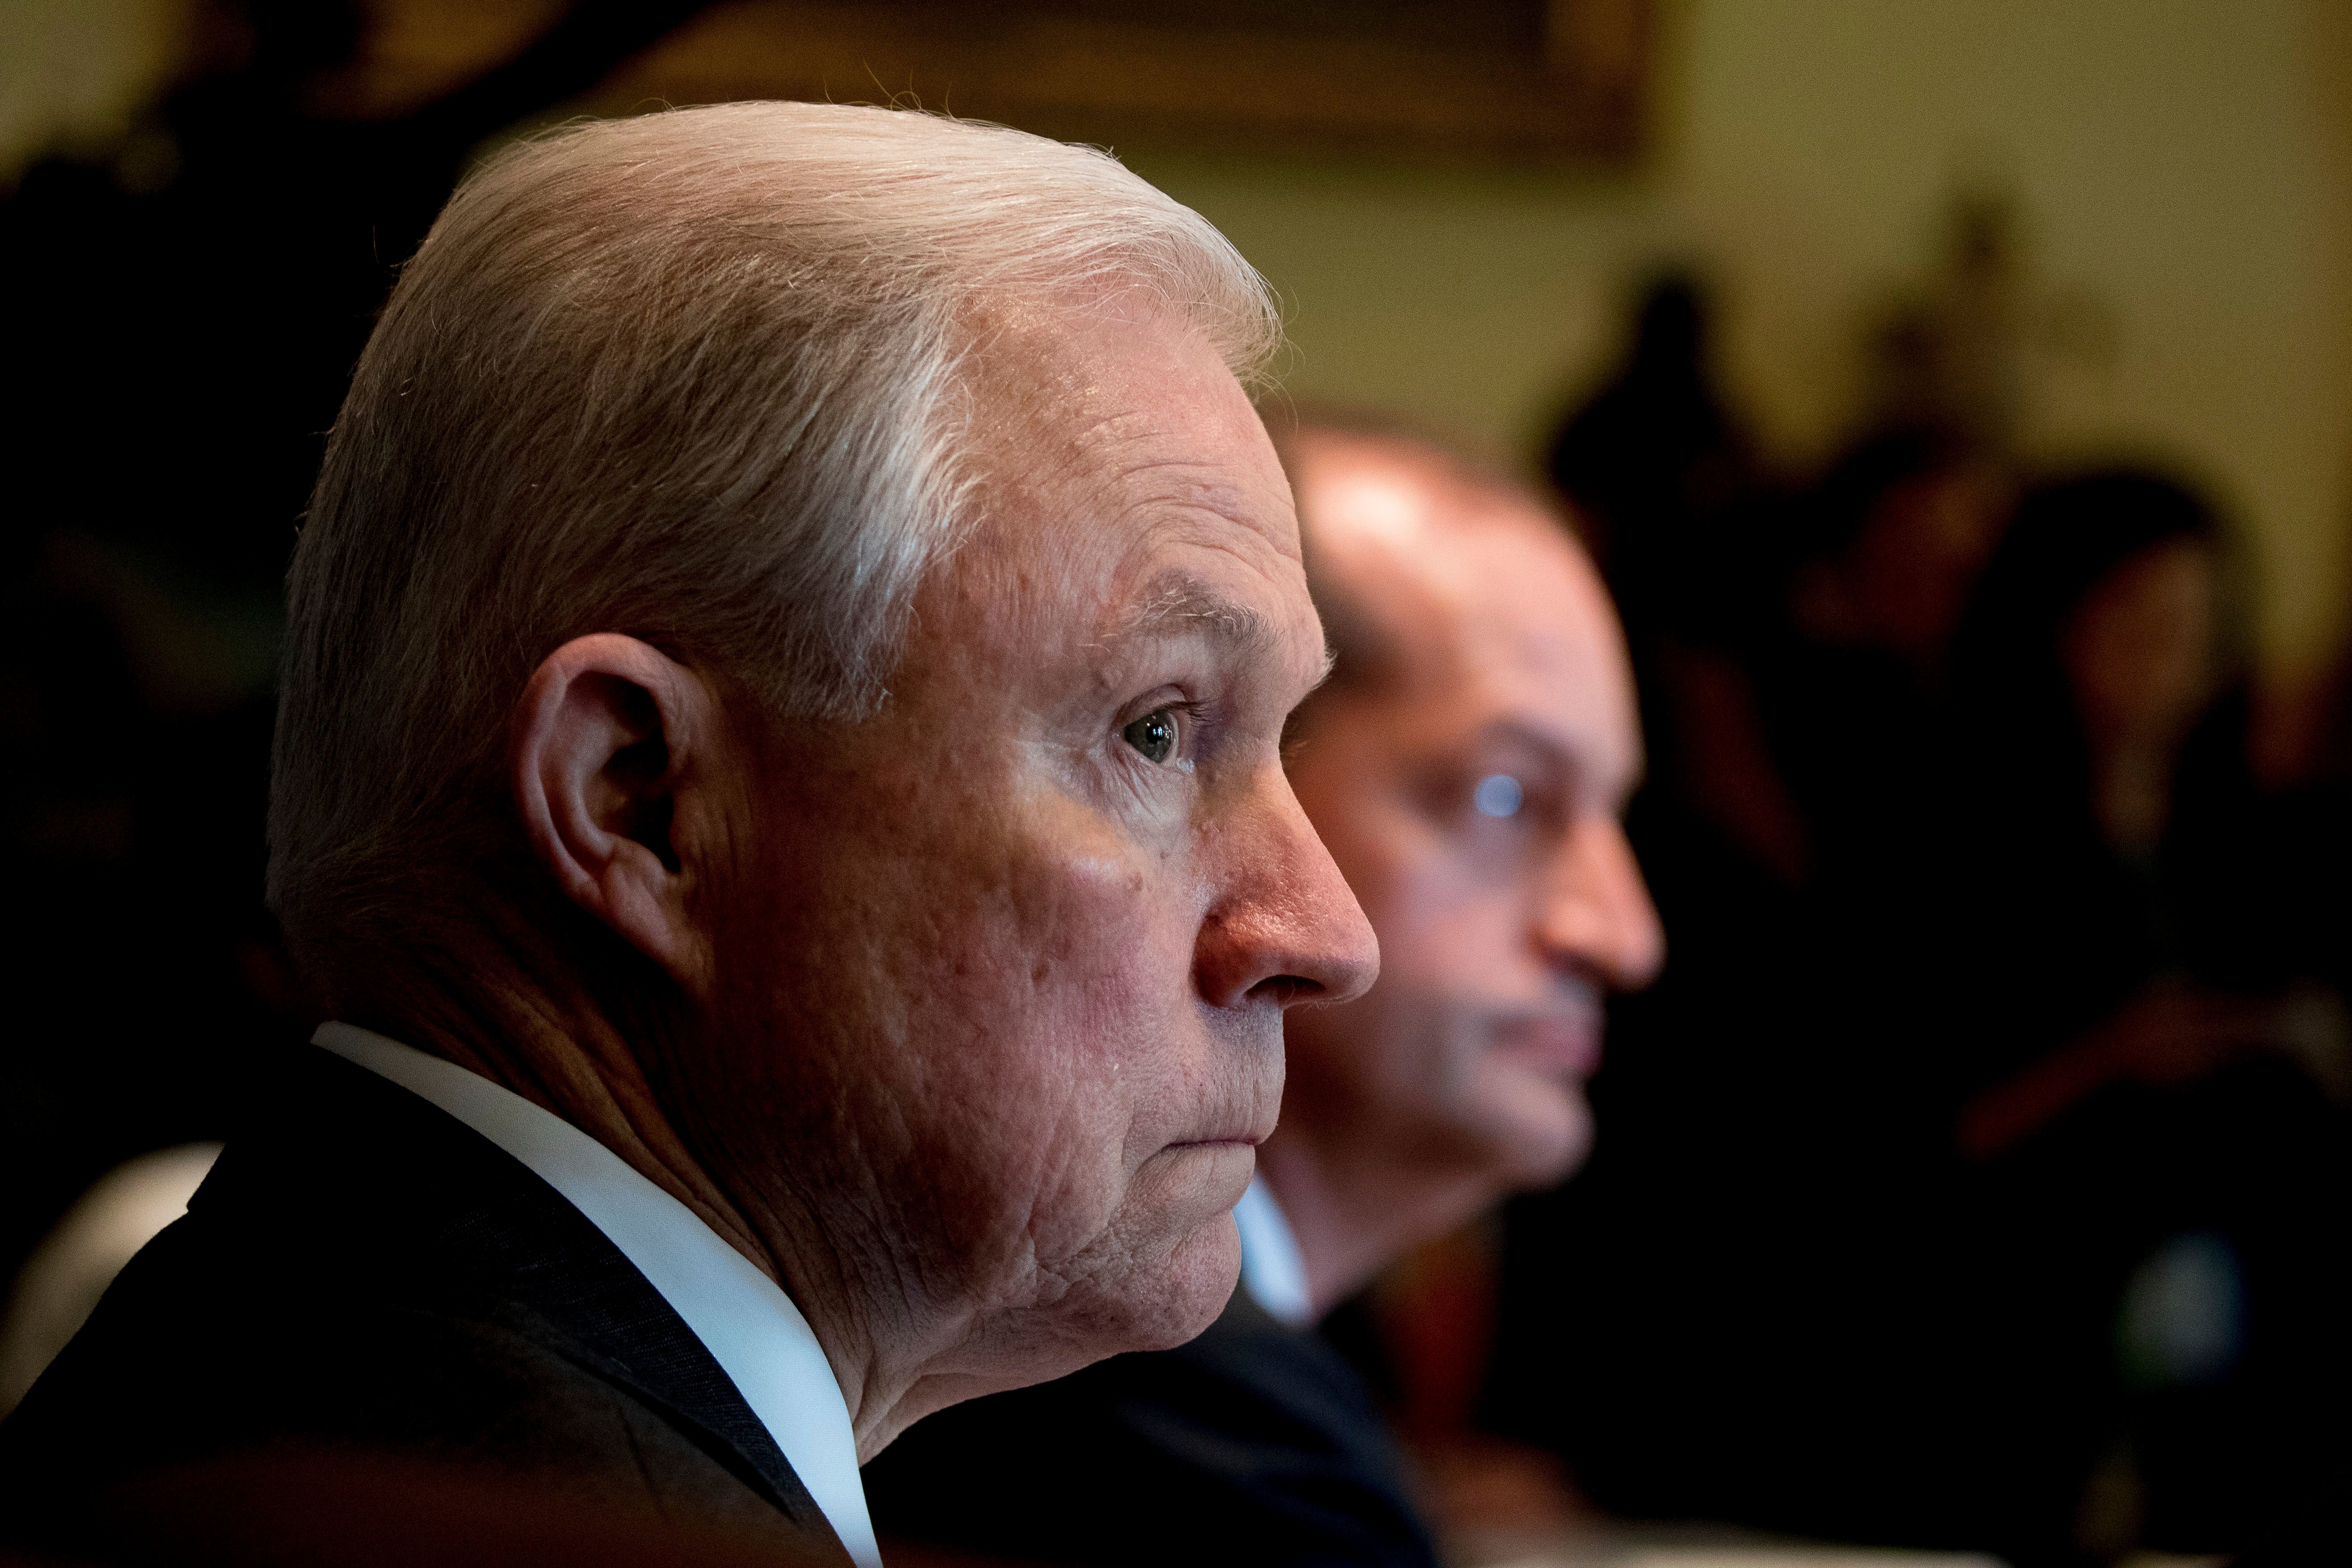 Jeff Sessions Braces For Sharp Questions During Public Testimony To Senate Panel